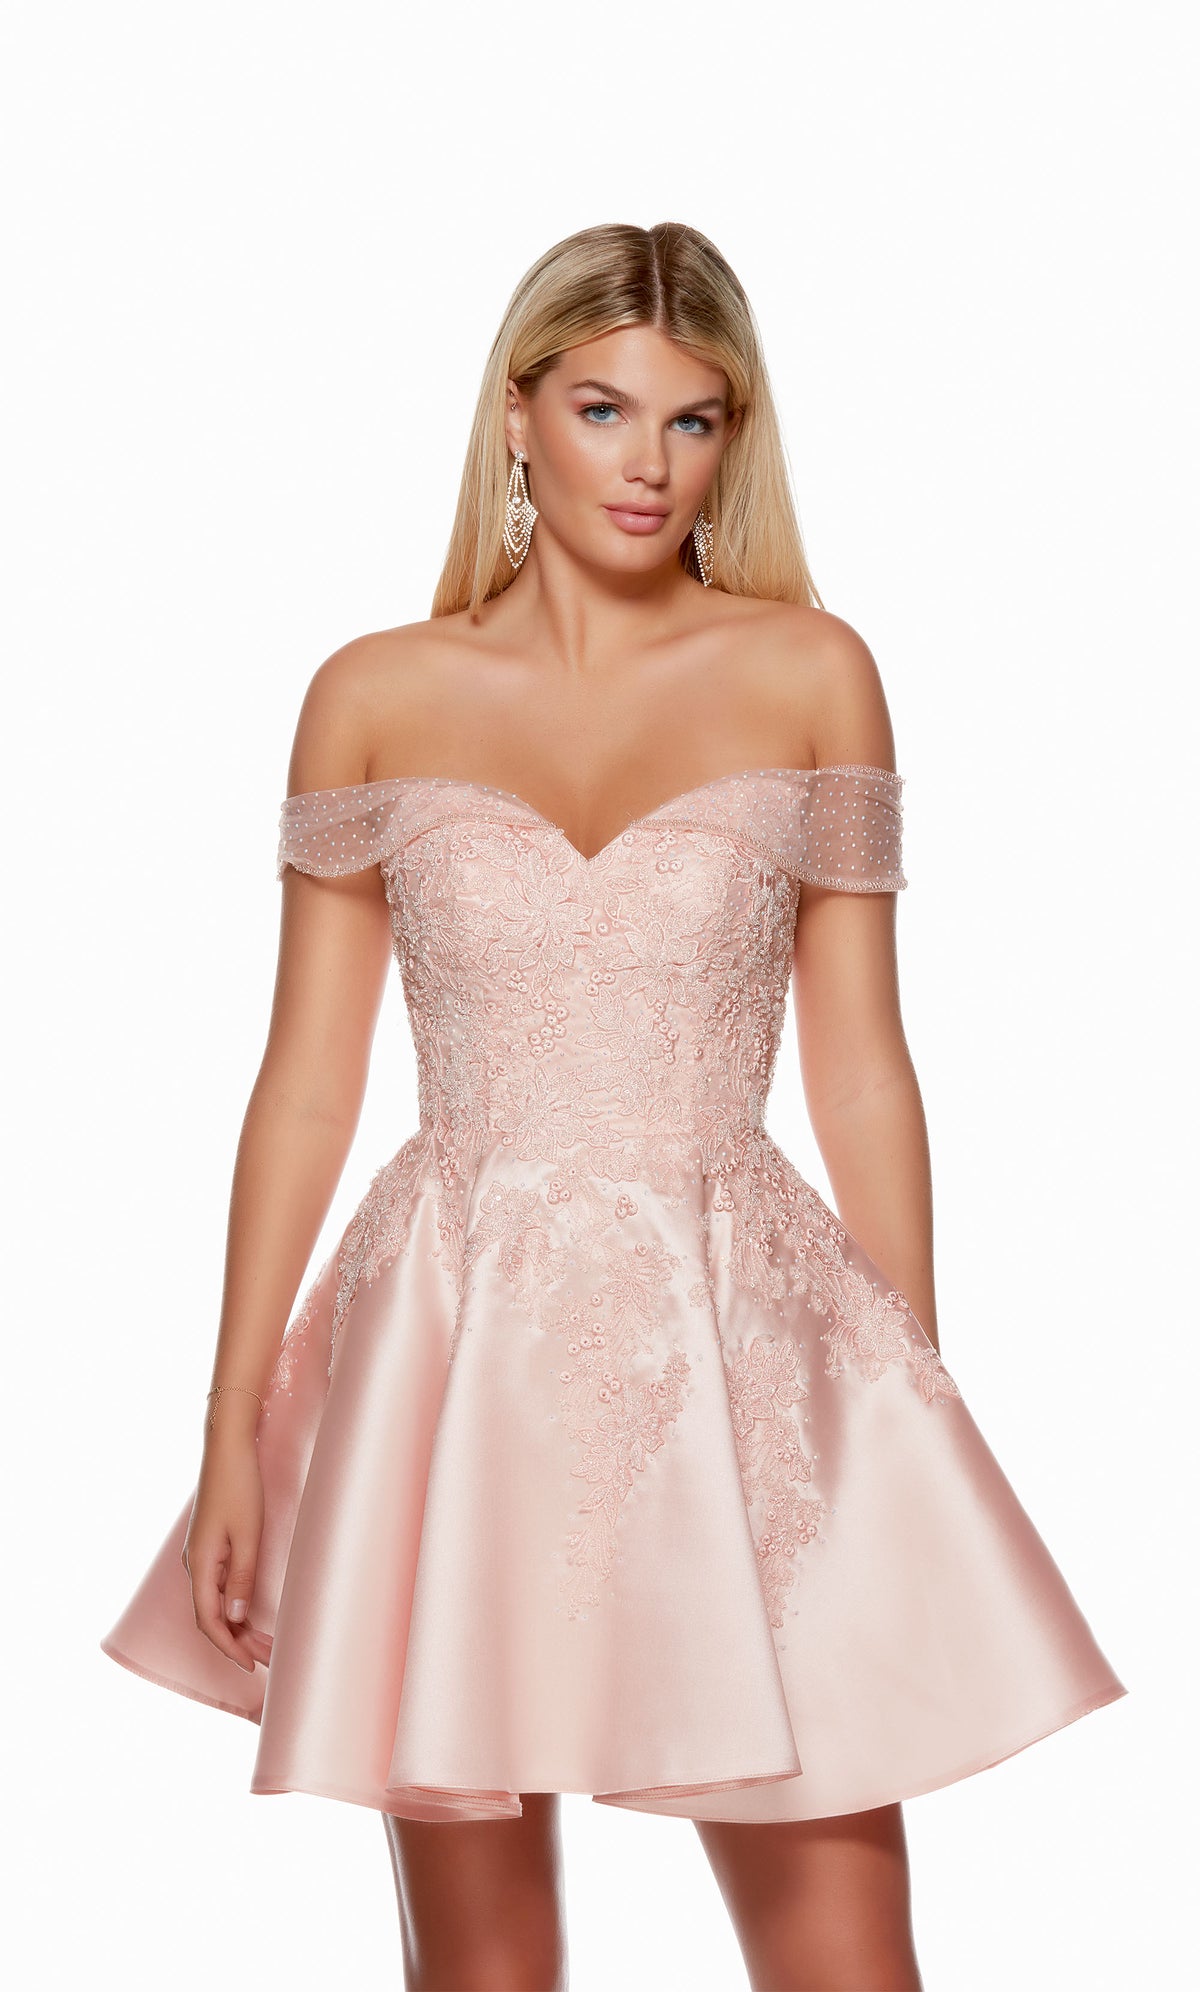 An elegant and chic short homecoming dress, showcasing an off-the-shoulder neckline, a fitted bodice, and a flare skirt, designed to make a stylish statement.